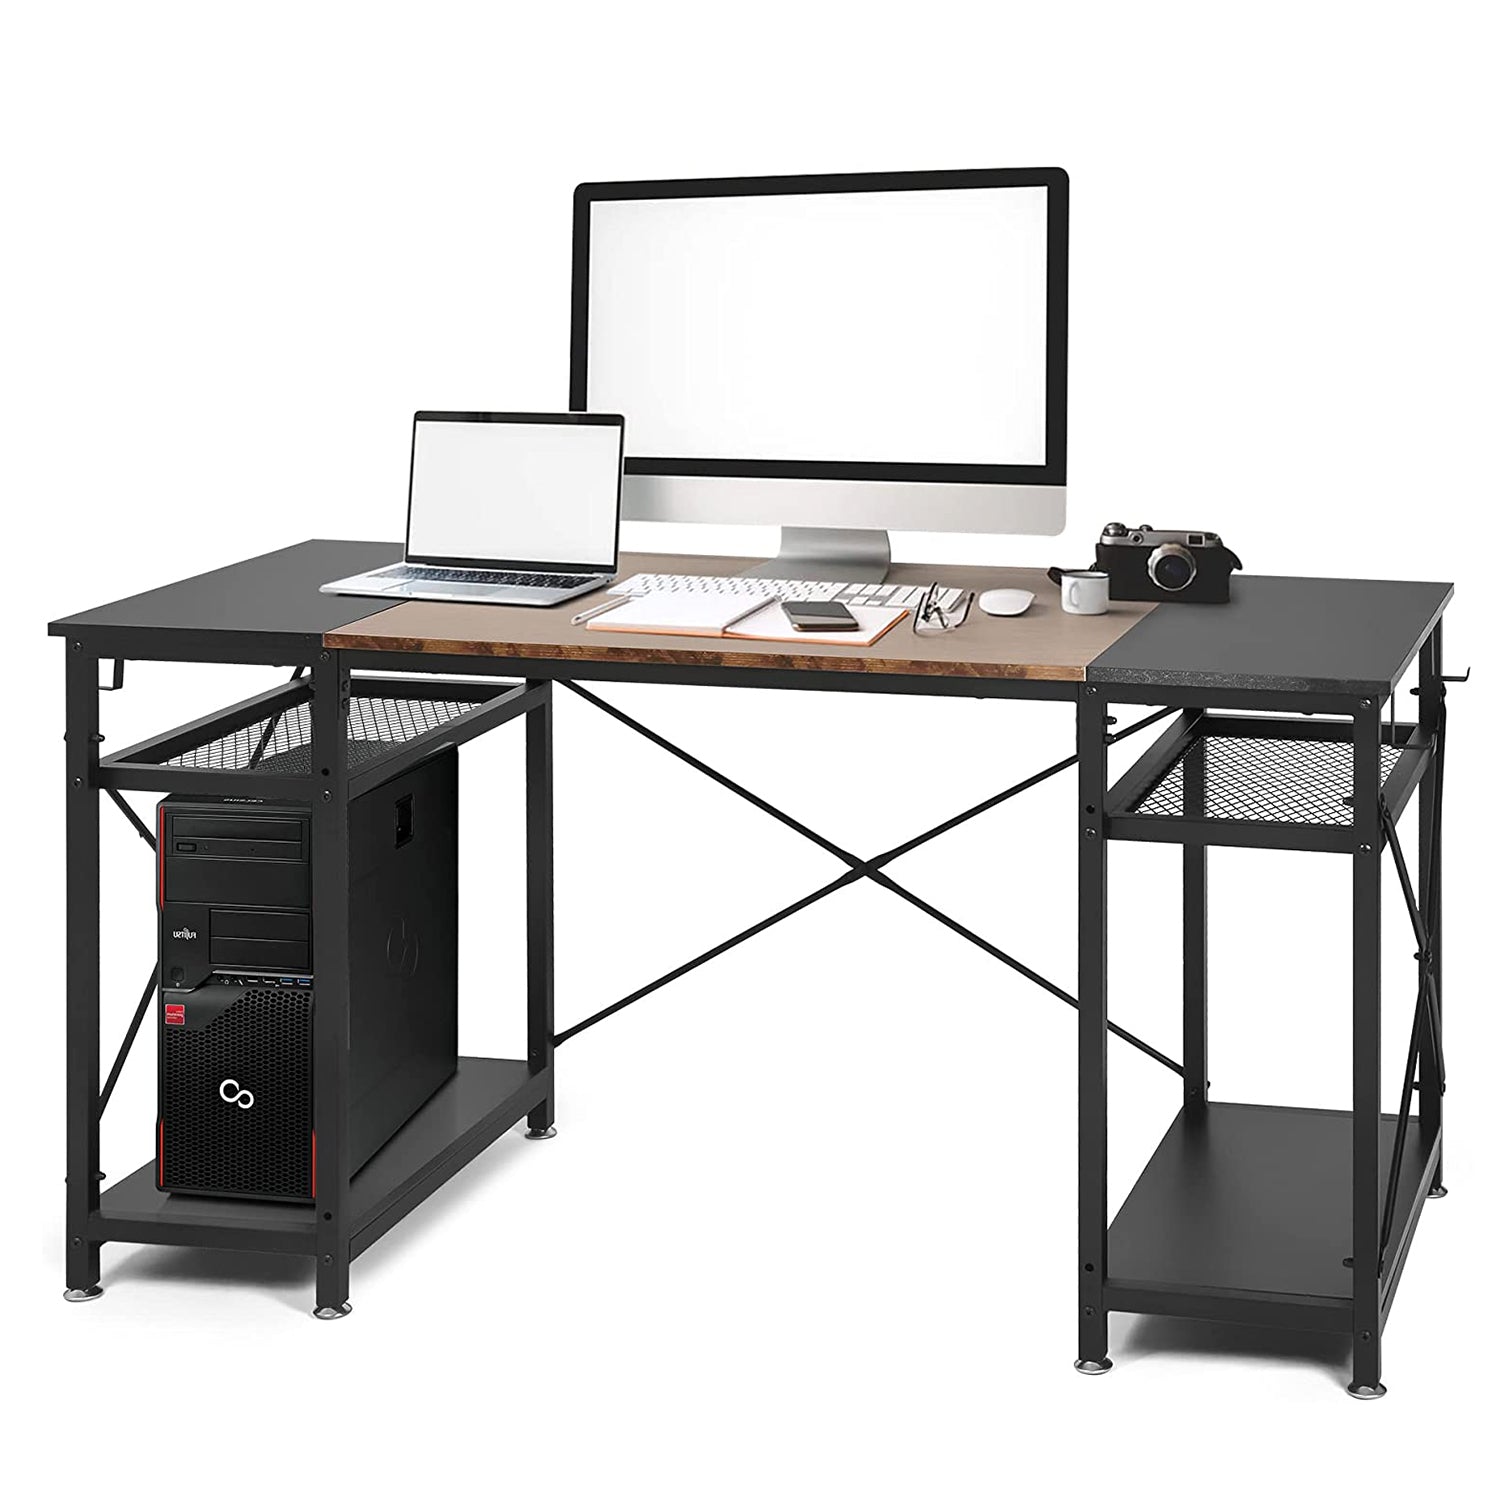 Spacious 47.2" Computer Desk with Storage Shelves, Hooks, and CPU Stand - Ideal Home Office Desk for Study and Work, Stylish Black